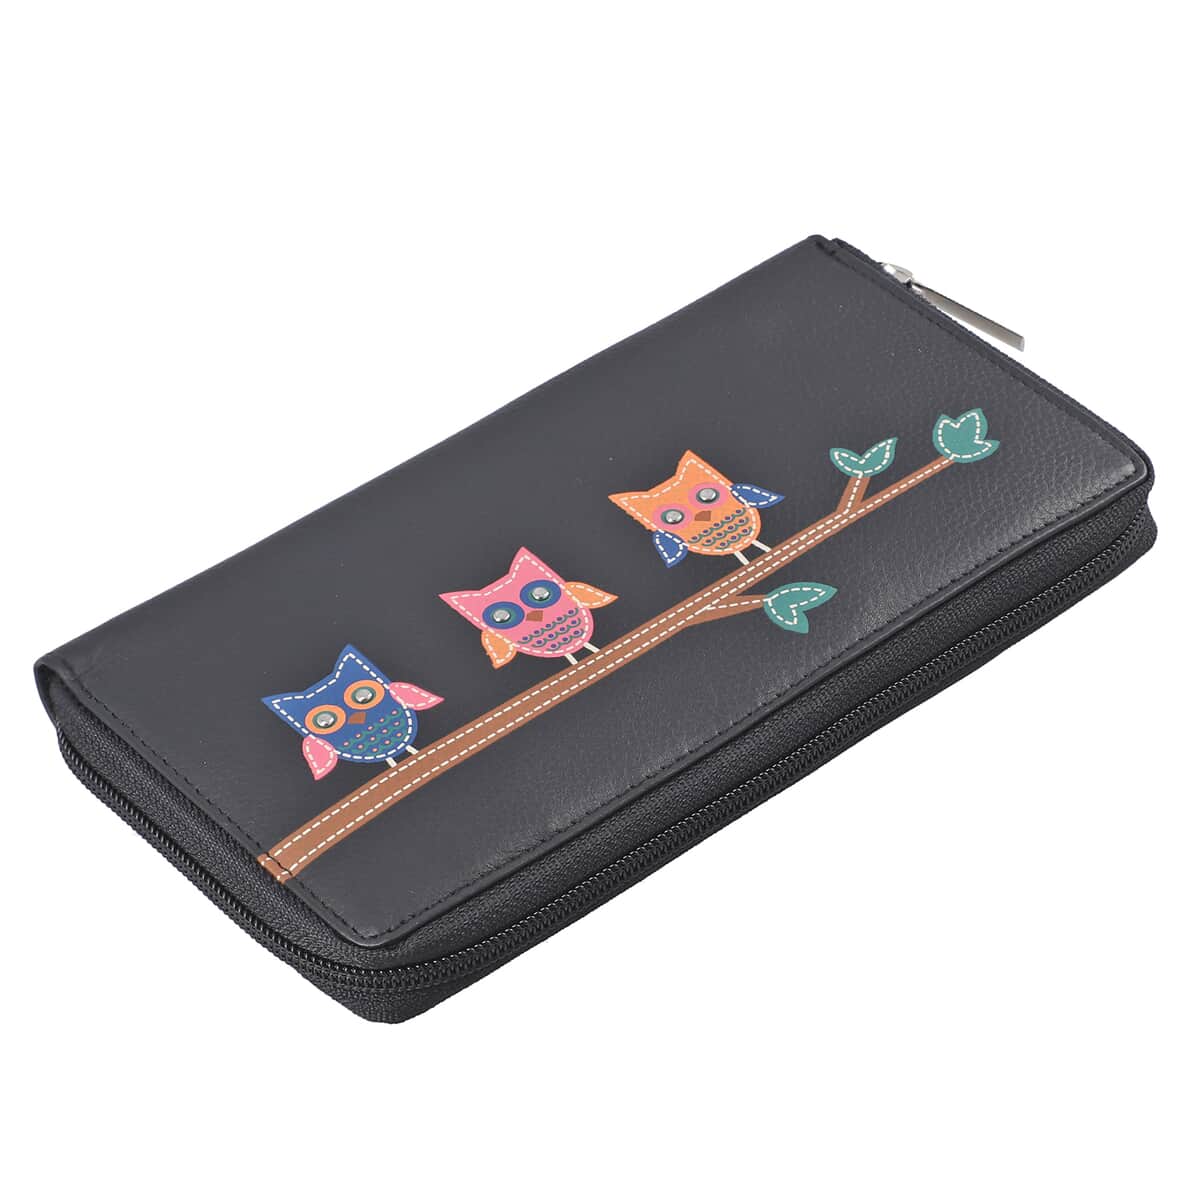 Union Code Black RFID Protected Genuine Leather Owl Family Applique Women's Wallet image number 5